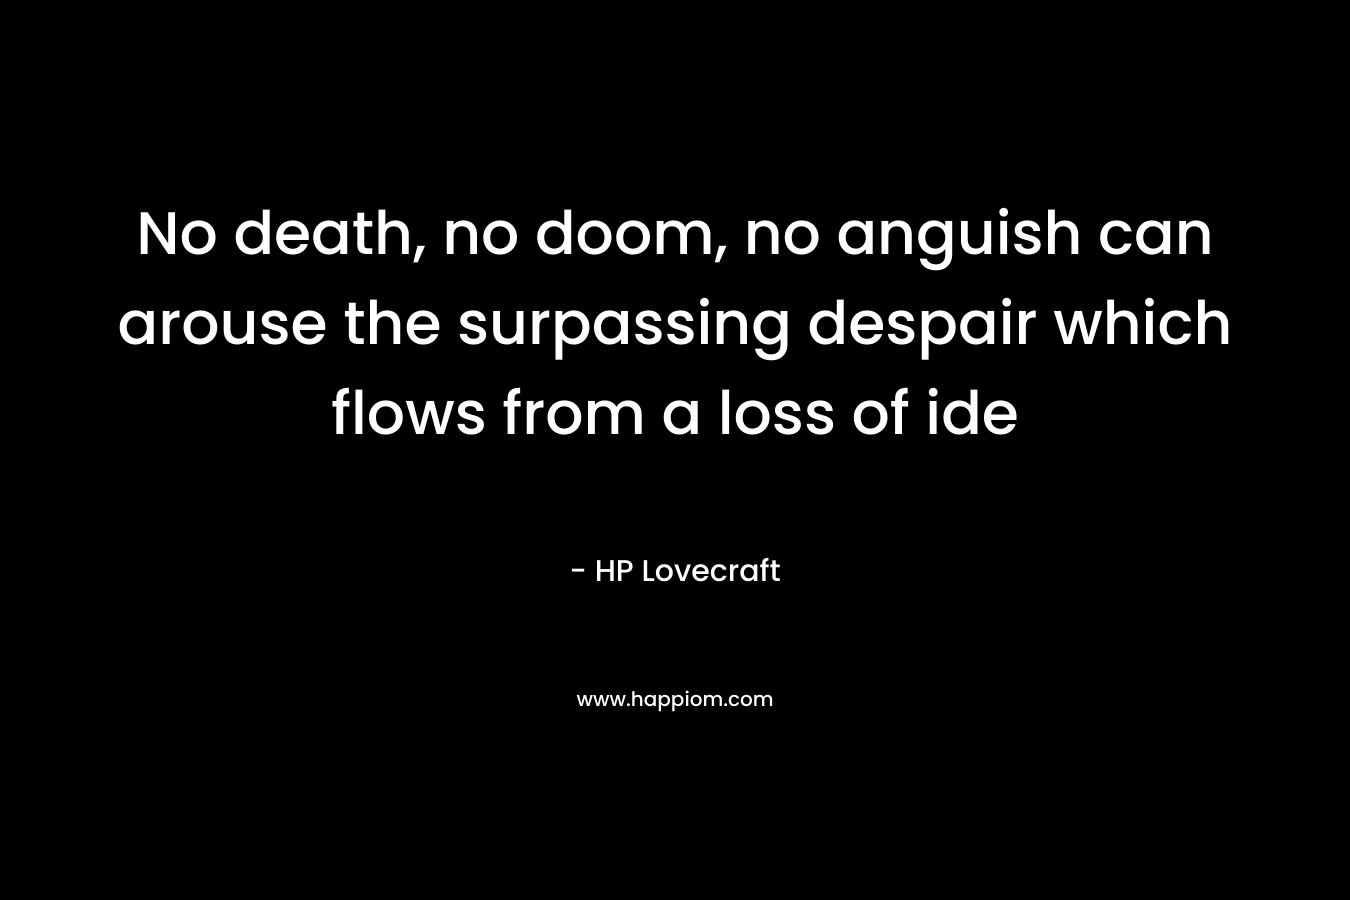 No death, no doom, no anguish can arouse the surpassing despair which flows from a loss of ide – HP Lovecraft